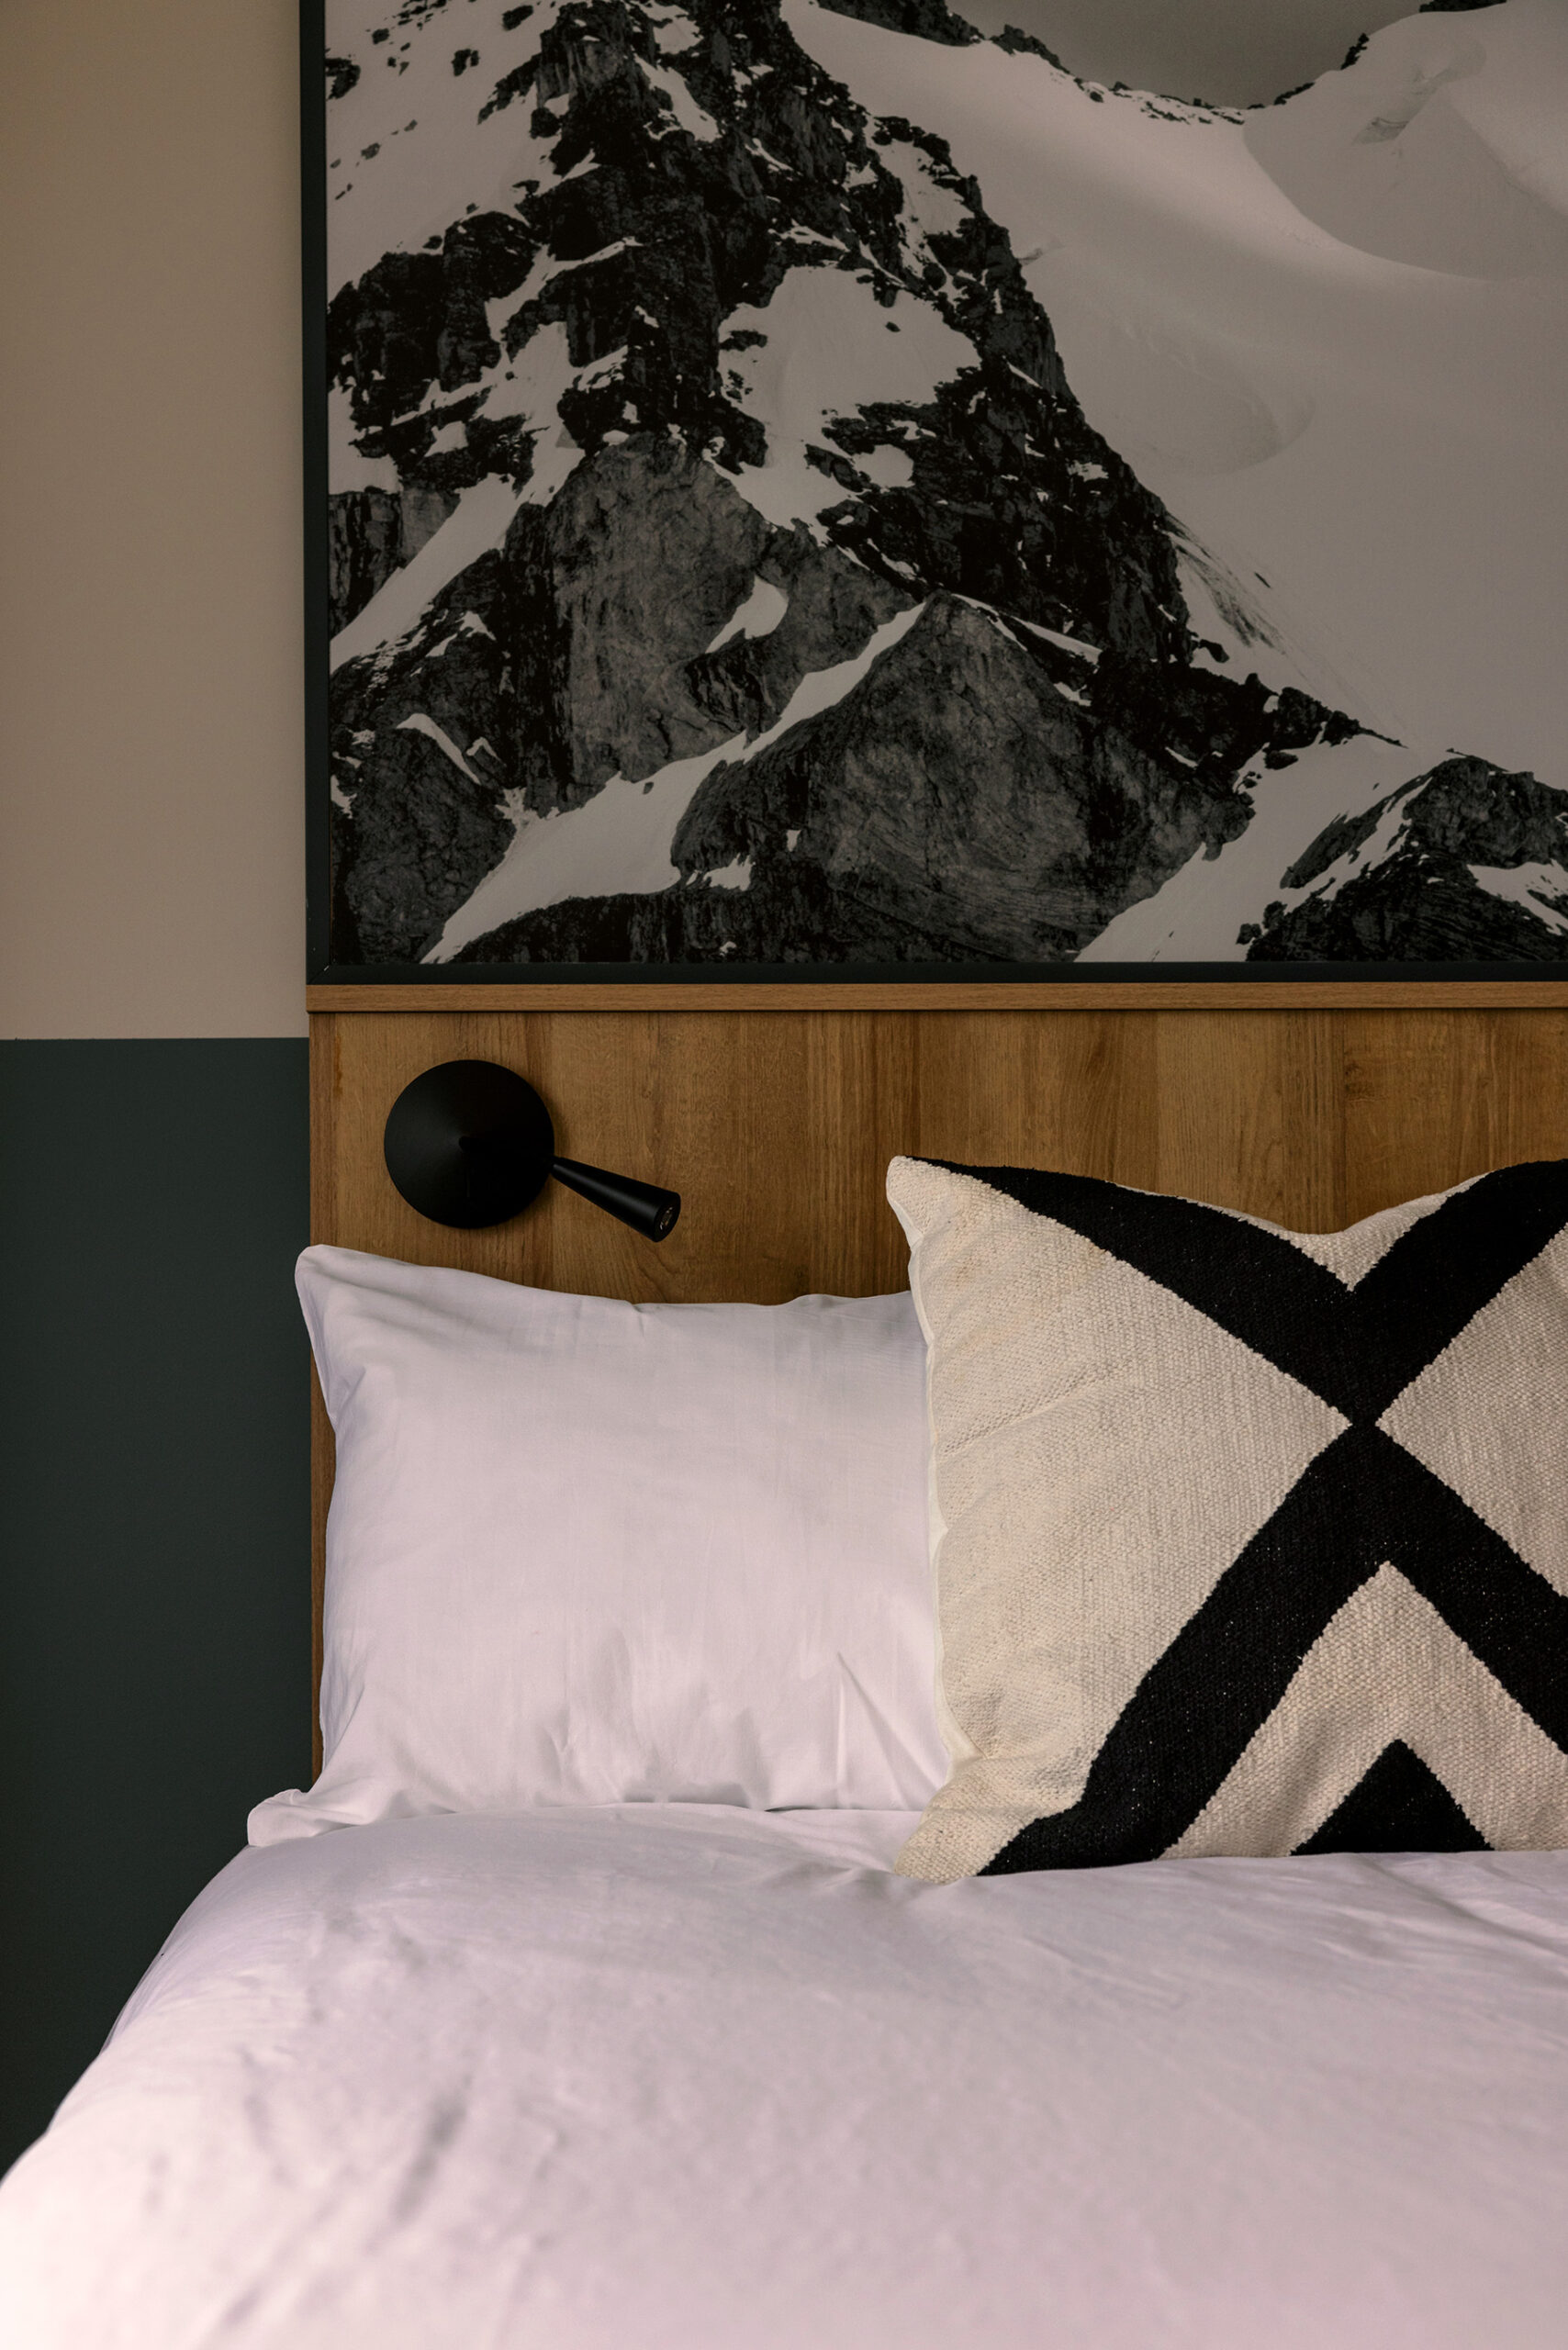 Cropped photo of a bed with white linens and a throw pillow with a black X on it. There is a large black and white mountain photograph on the wall above the wooden headboard. The walls are green.